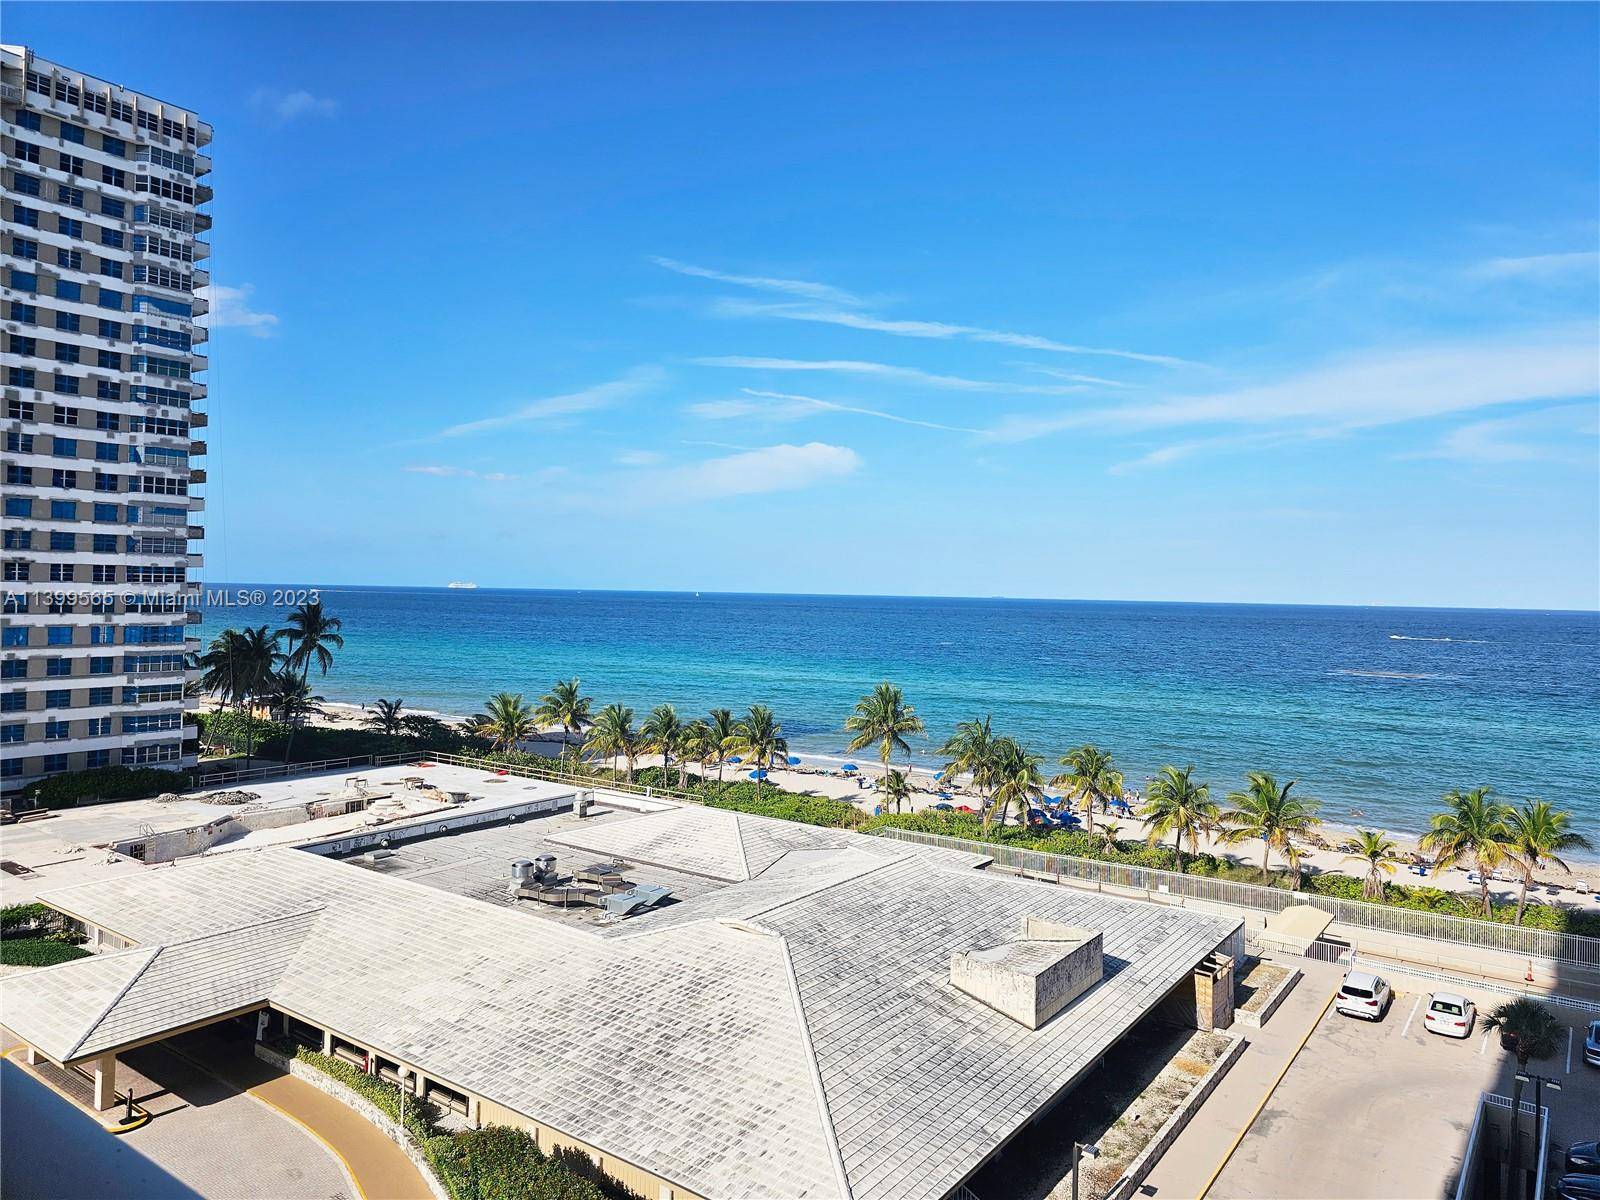 Seasonal Rental Direct Oceanfront Unit, Spectacular views of the Ocean, 2 bedroom, 2 bath, unit has top of line appliances, remodeled apartment with modern furniture, 1 underground parking space, Resort ...